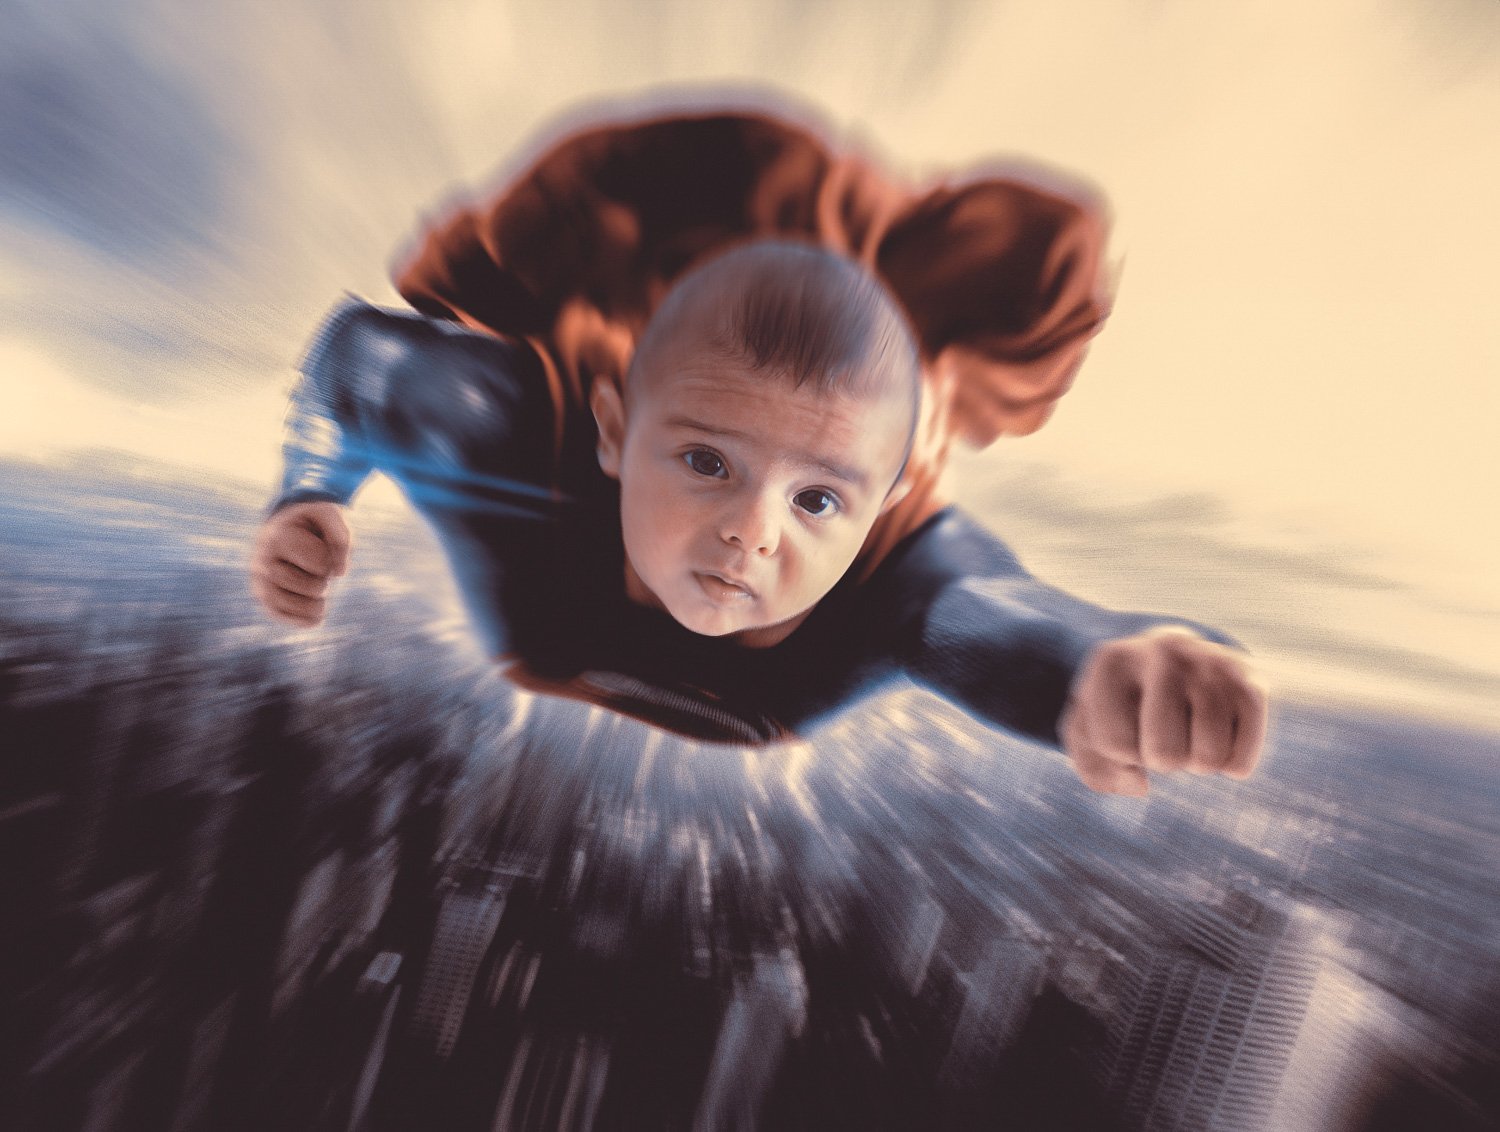 A baby boy dressed as Superman flying high above a city